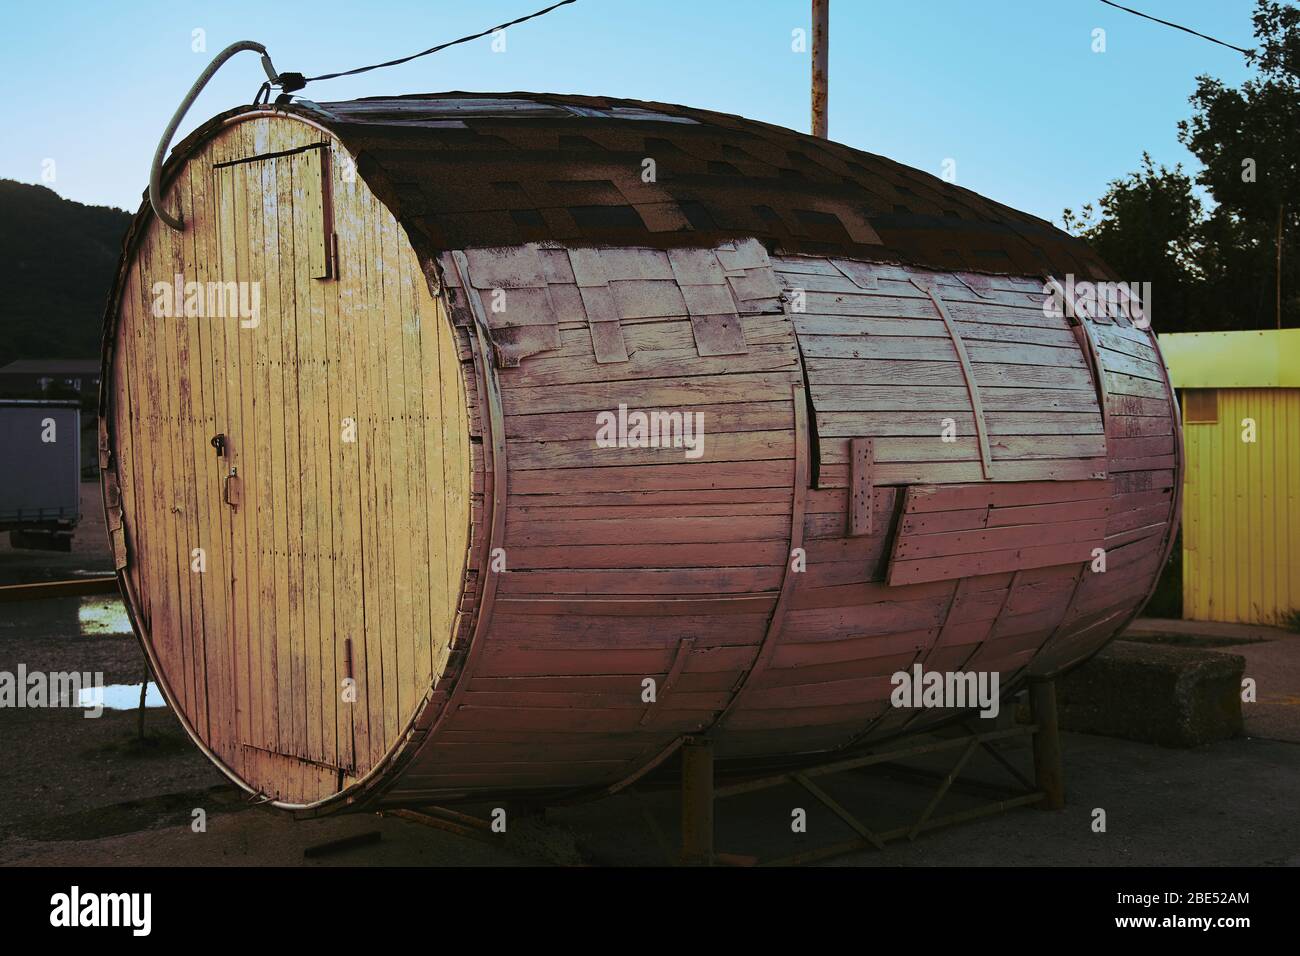 Unique dwelling in the form of a large wooden barrel Stock Photo